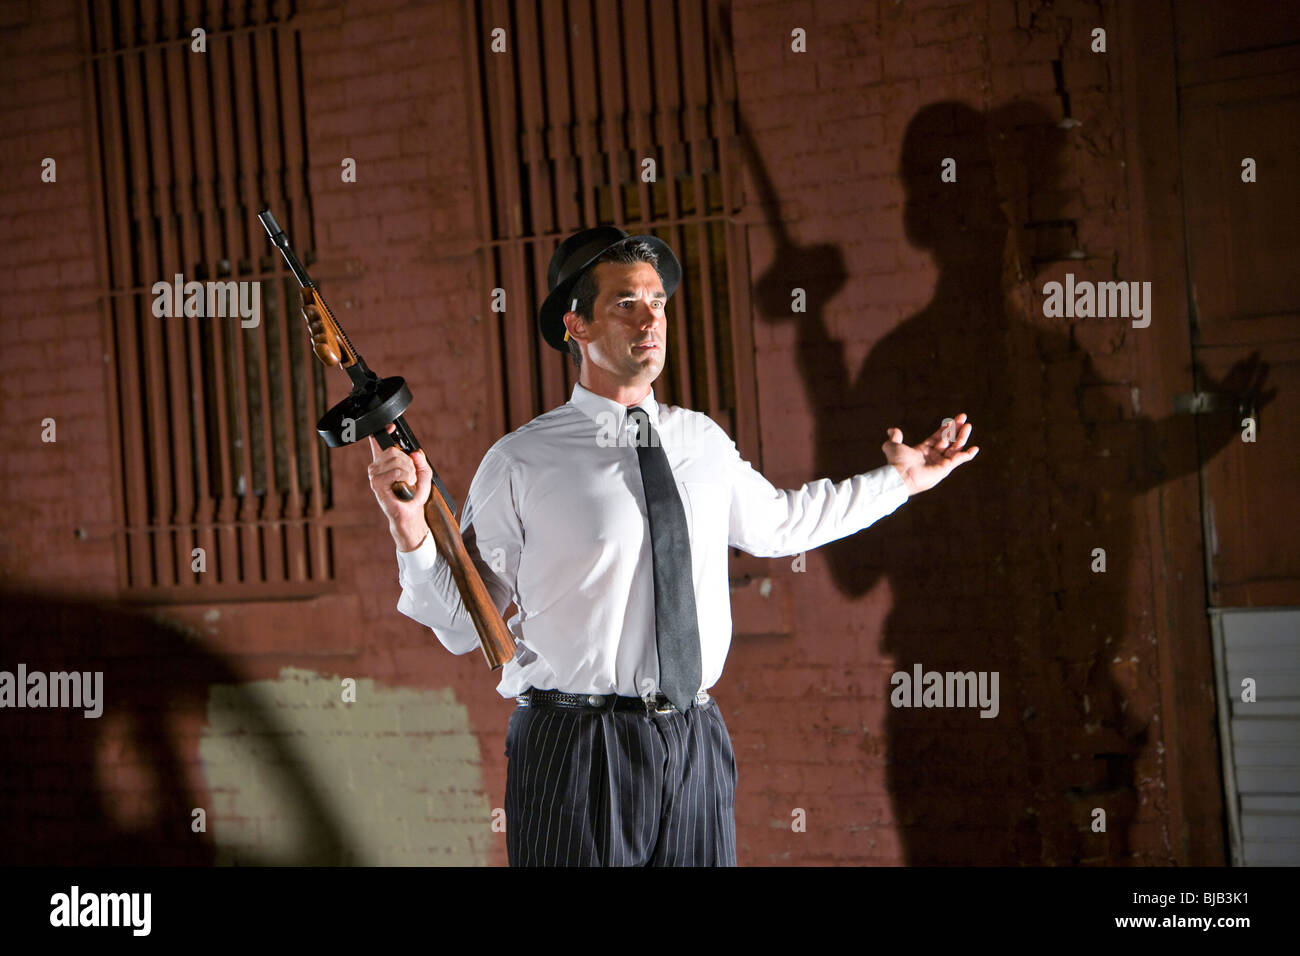 Gangster Holding Tommy Gun With Hands In Air Stock Photo Alamy